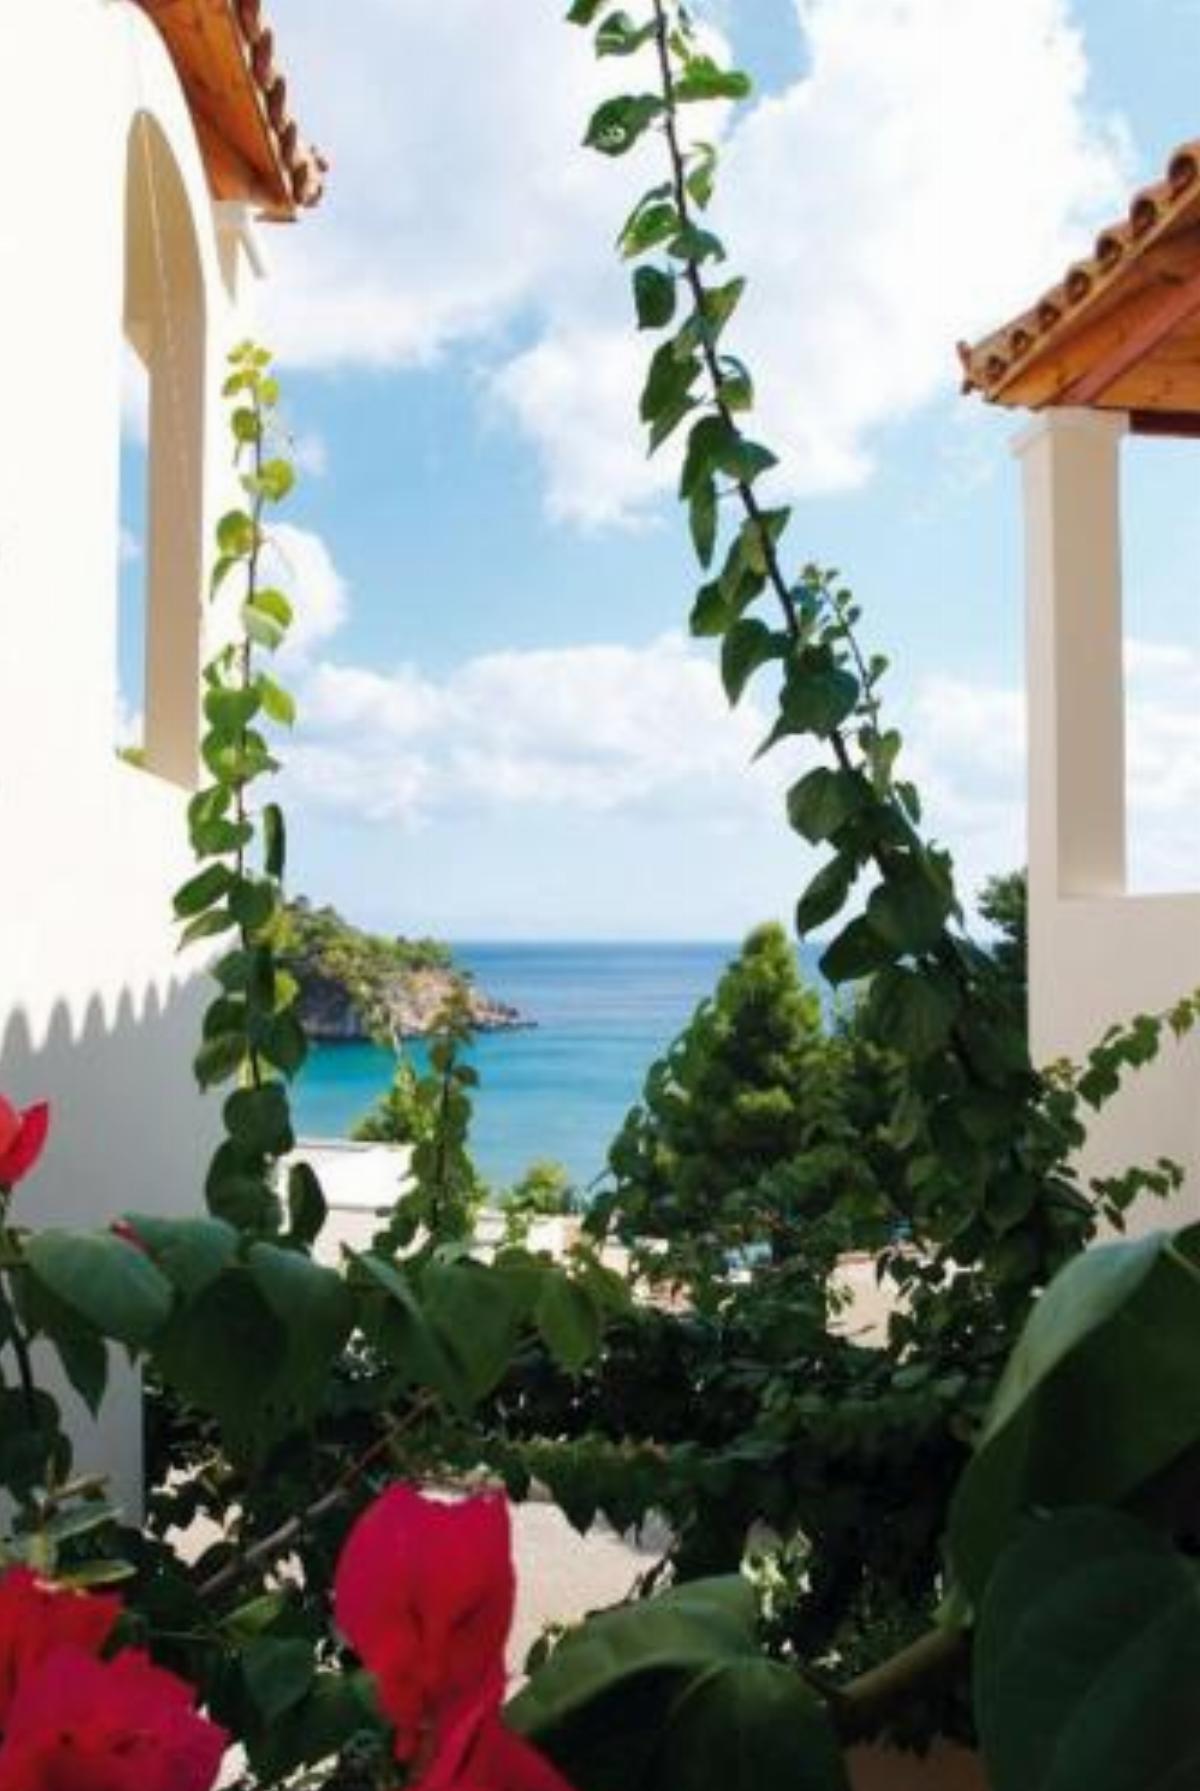 Alonissos Beach Bungalows And Suites Hotel Hotel Alonnisos Old Town Greece